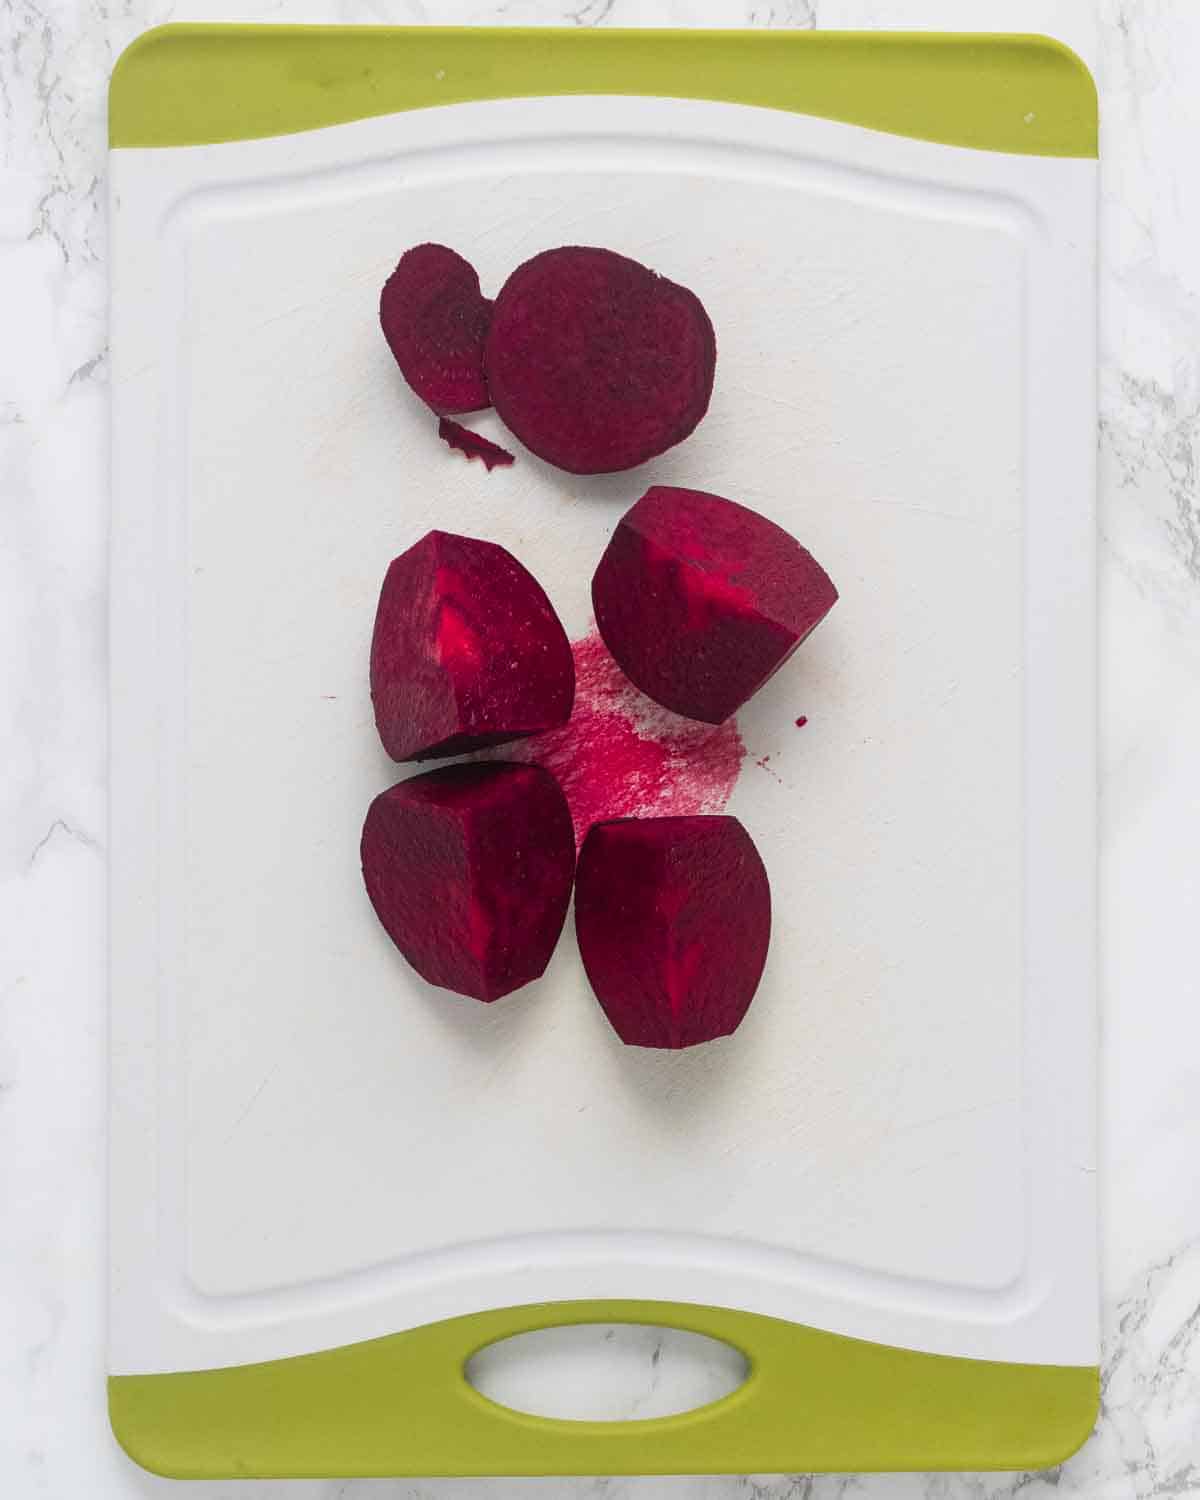 One beet quartered on a chopping board.